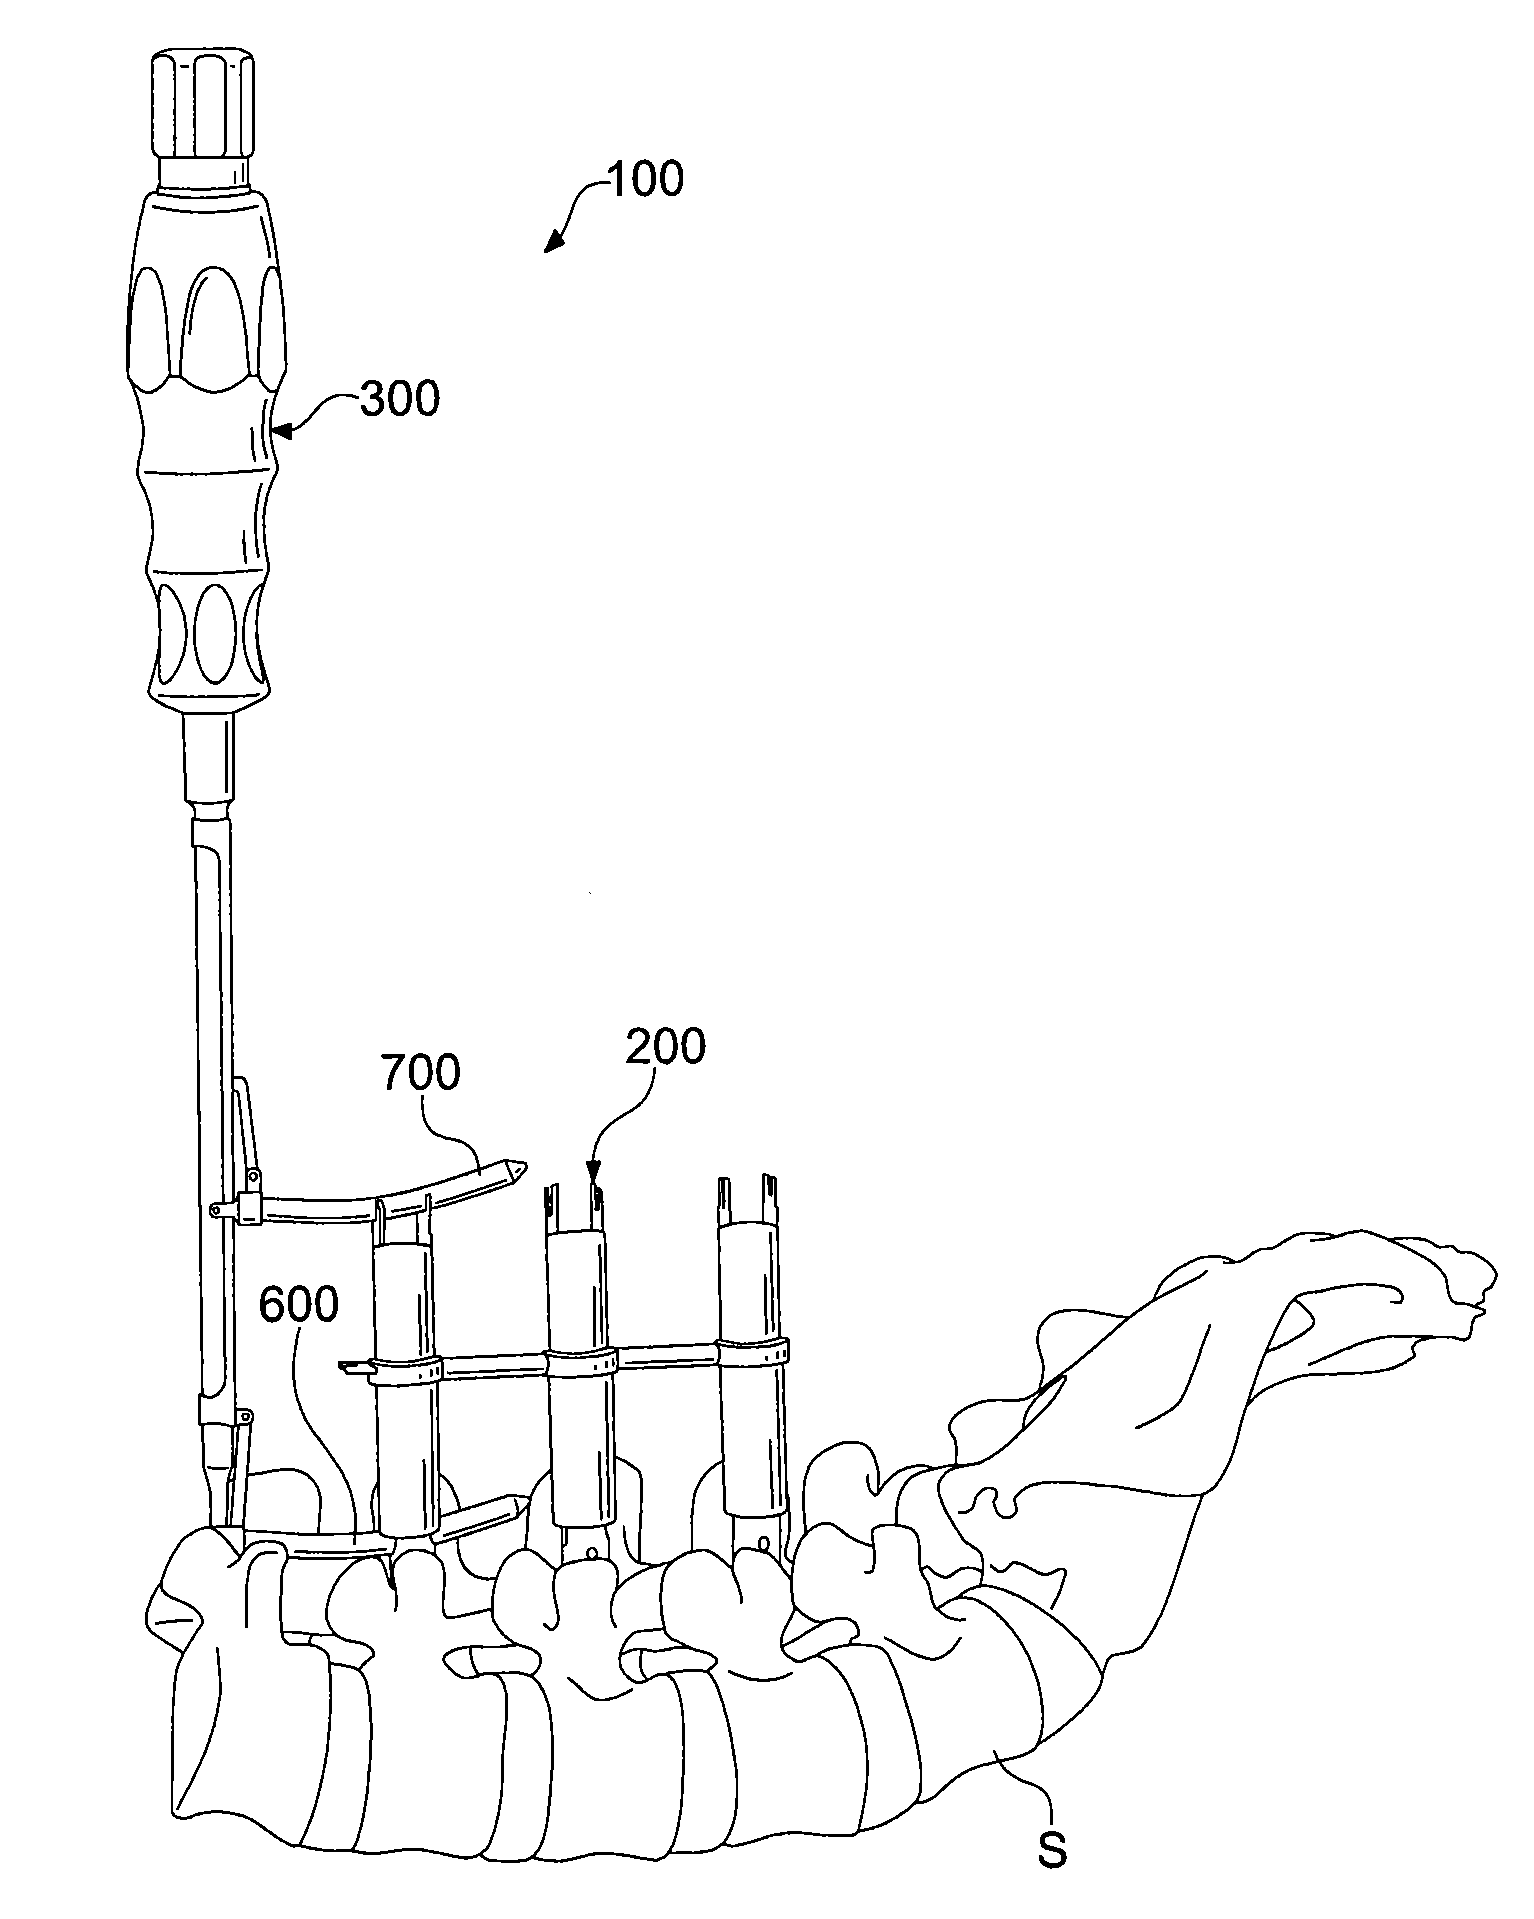 Percutaneous rod insertion system and method